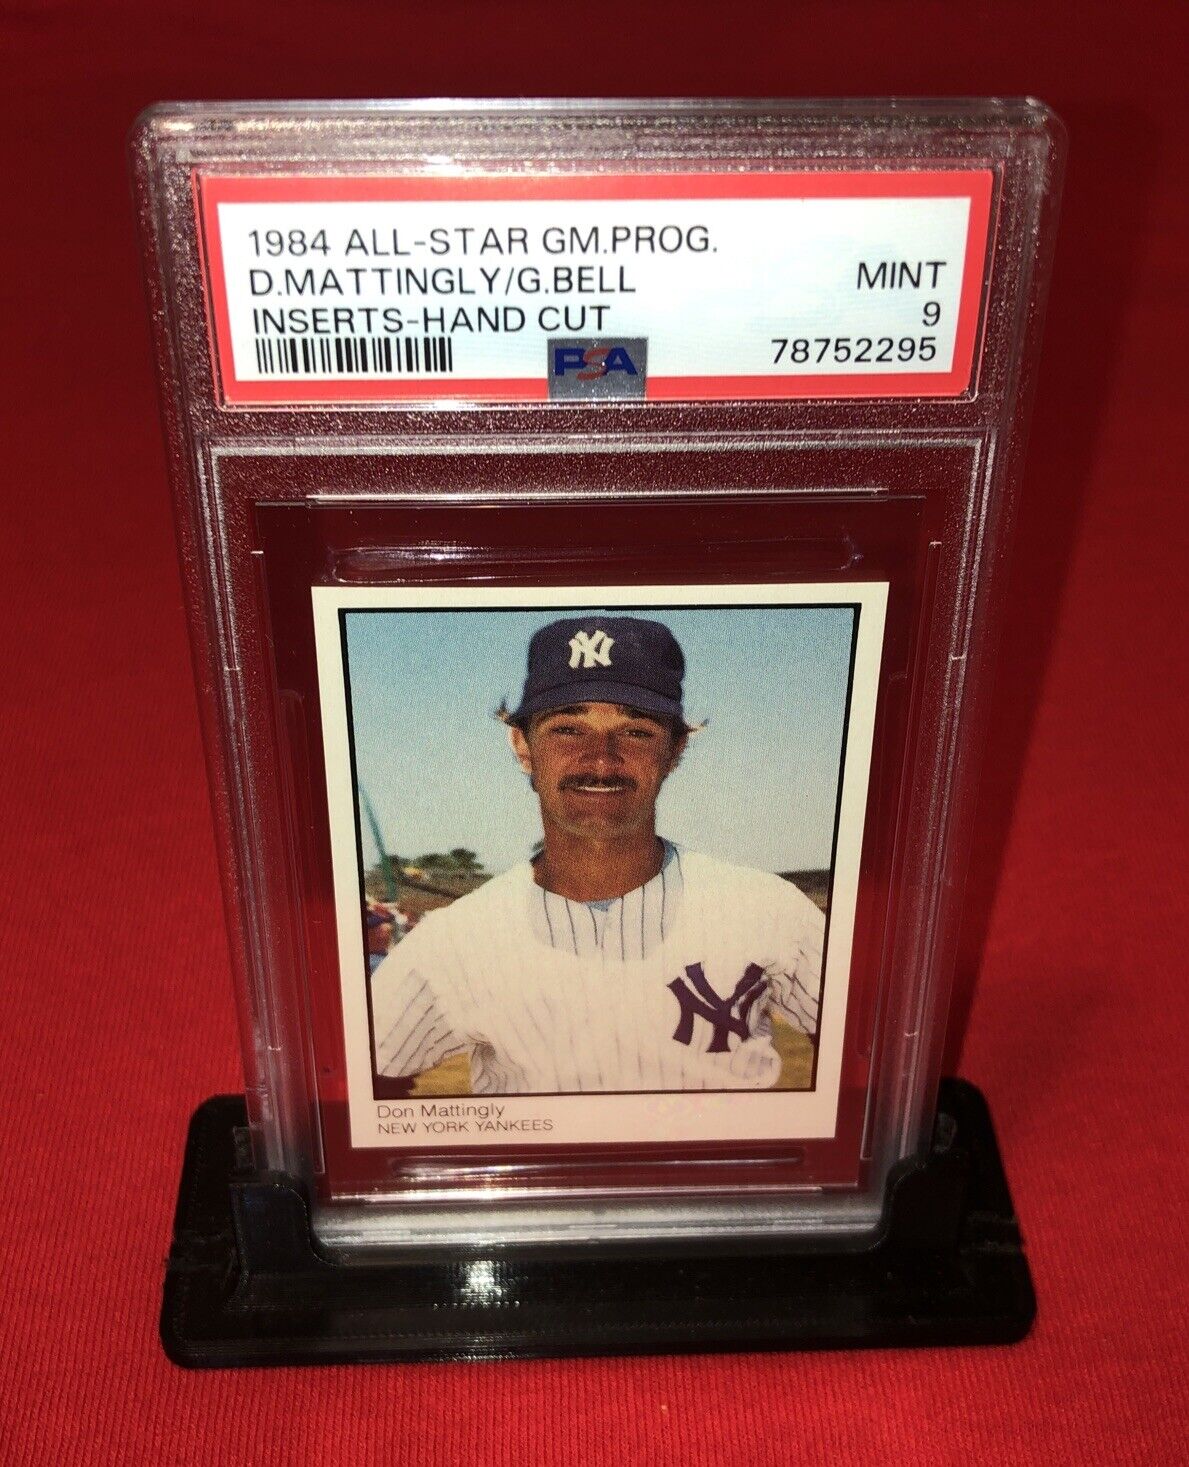 1984 Don Mattingly RC PSA 9 MINT Only 11 PSA 10 Higher Rare A/S Game Rookie Card